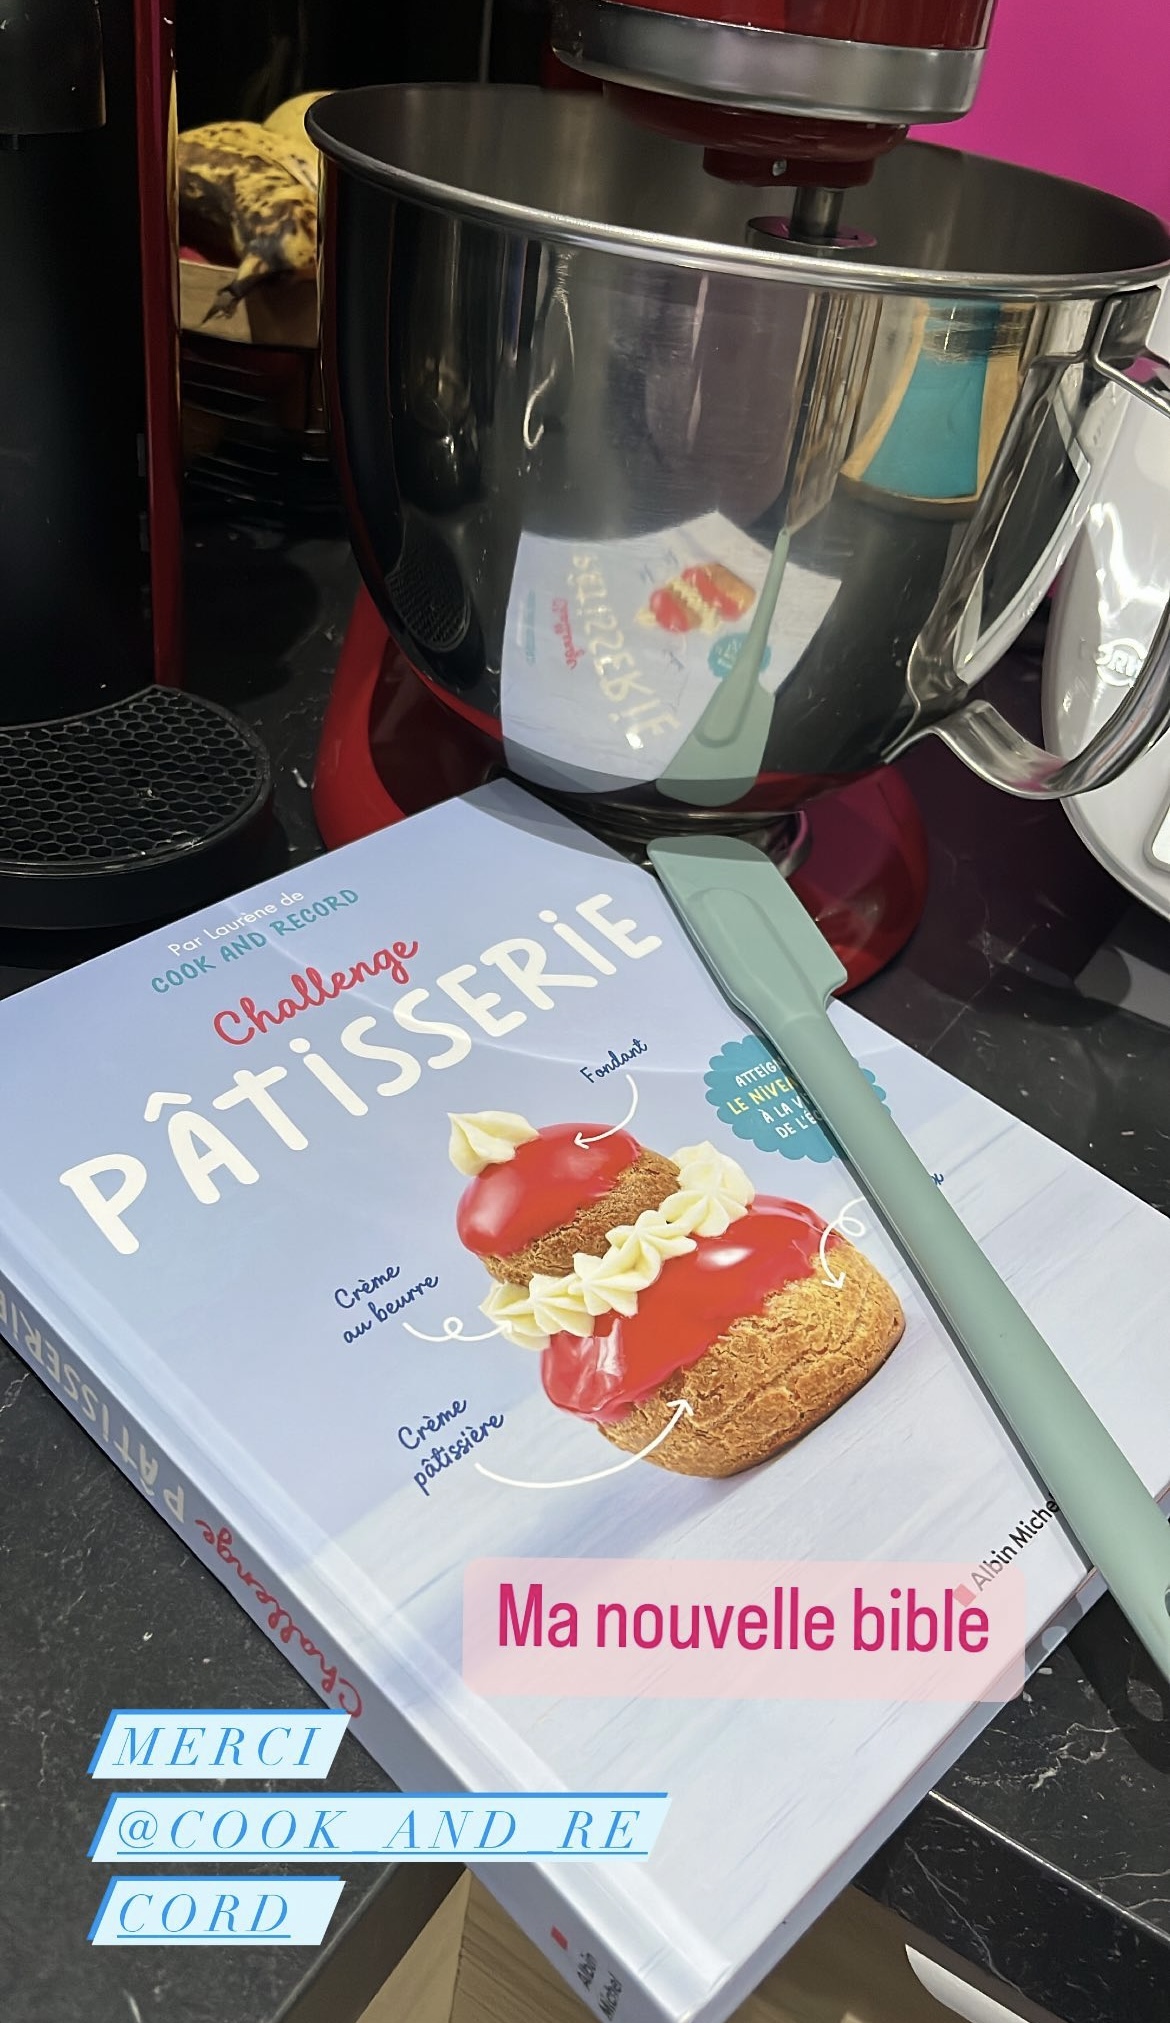 livre-challenge-patisserie-cook-and-record